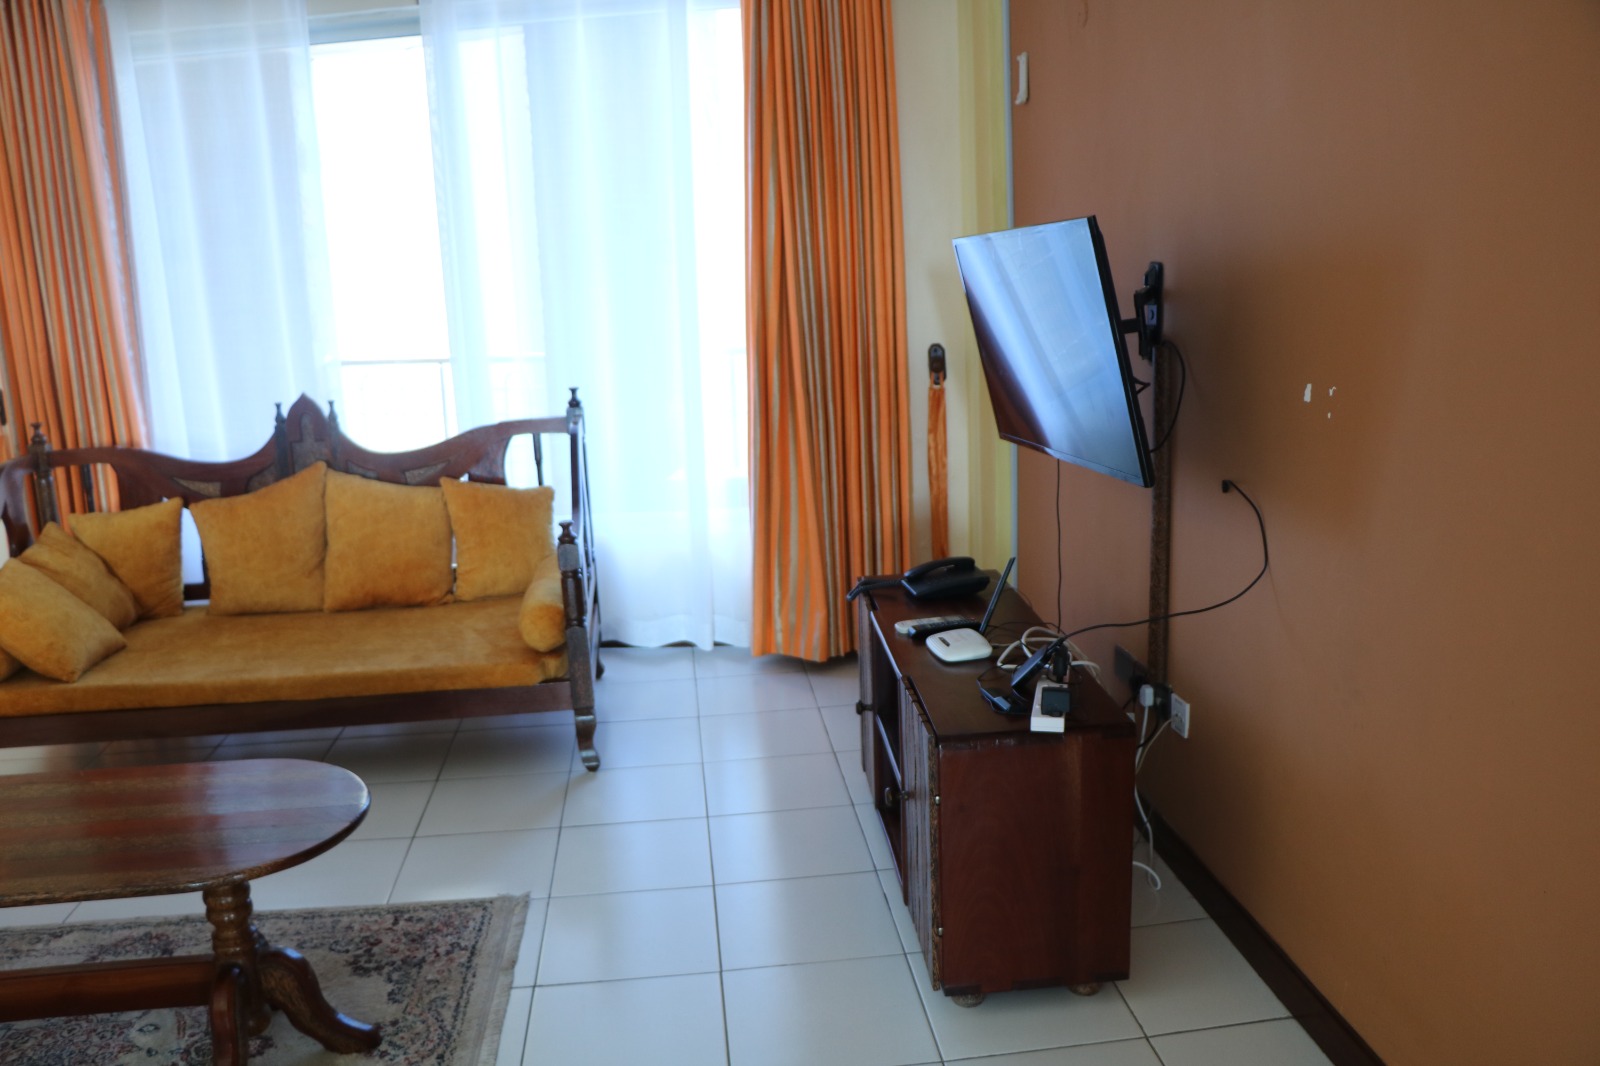 Family suite 2-bedrooom apartment in Mombasa Pirat. Affordable furnished Apartment for vacation in Mombasa | Zuru Life Africa